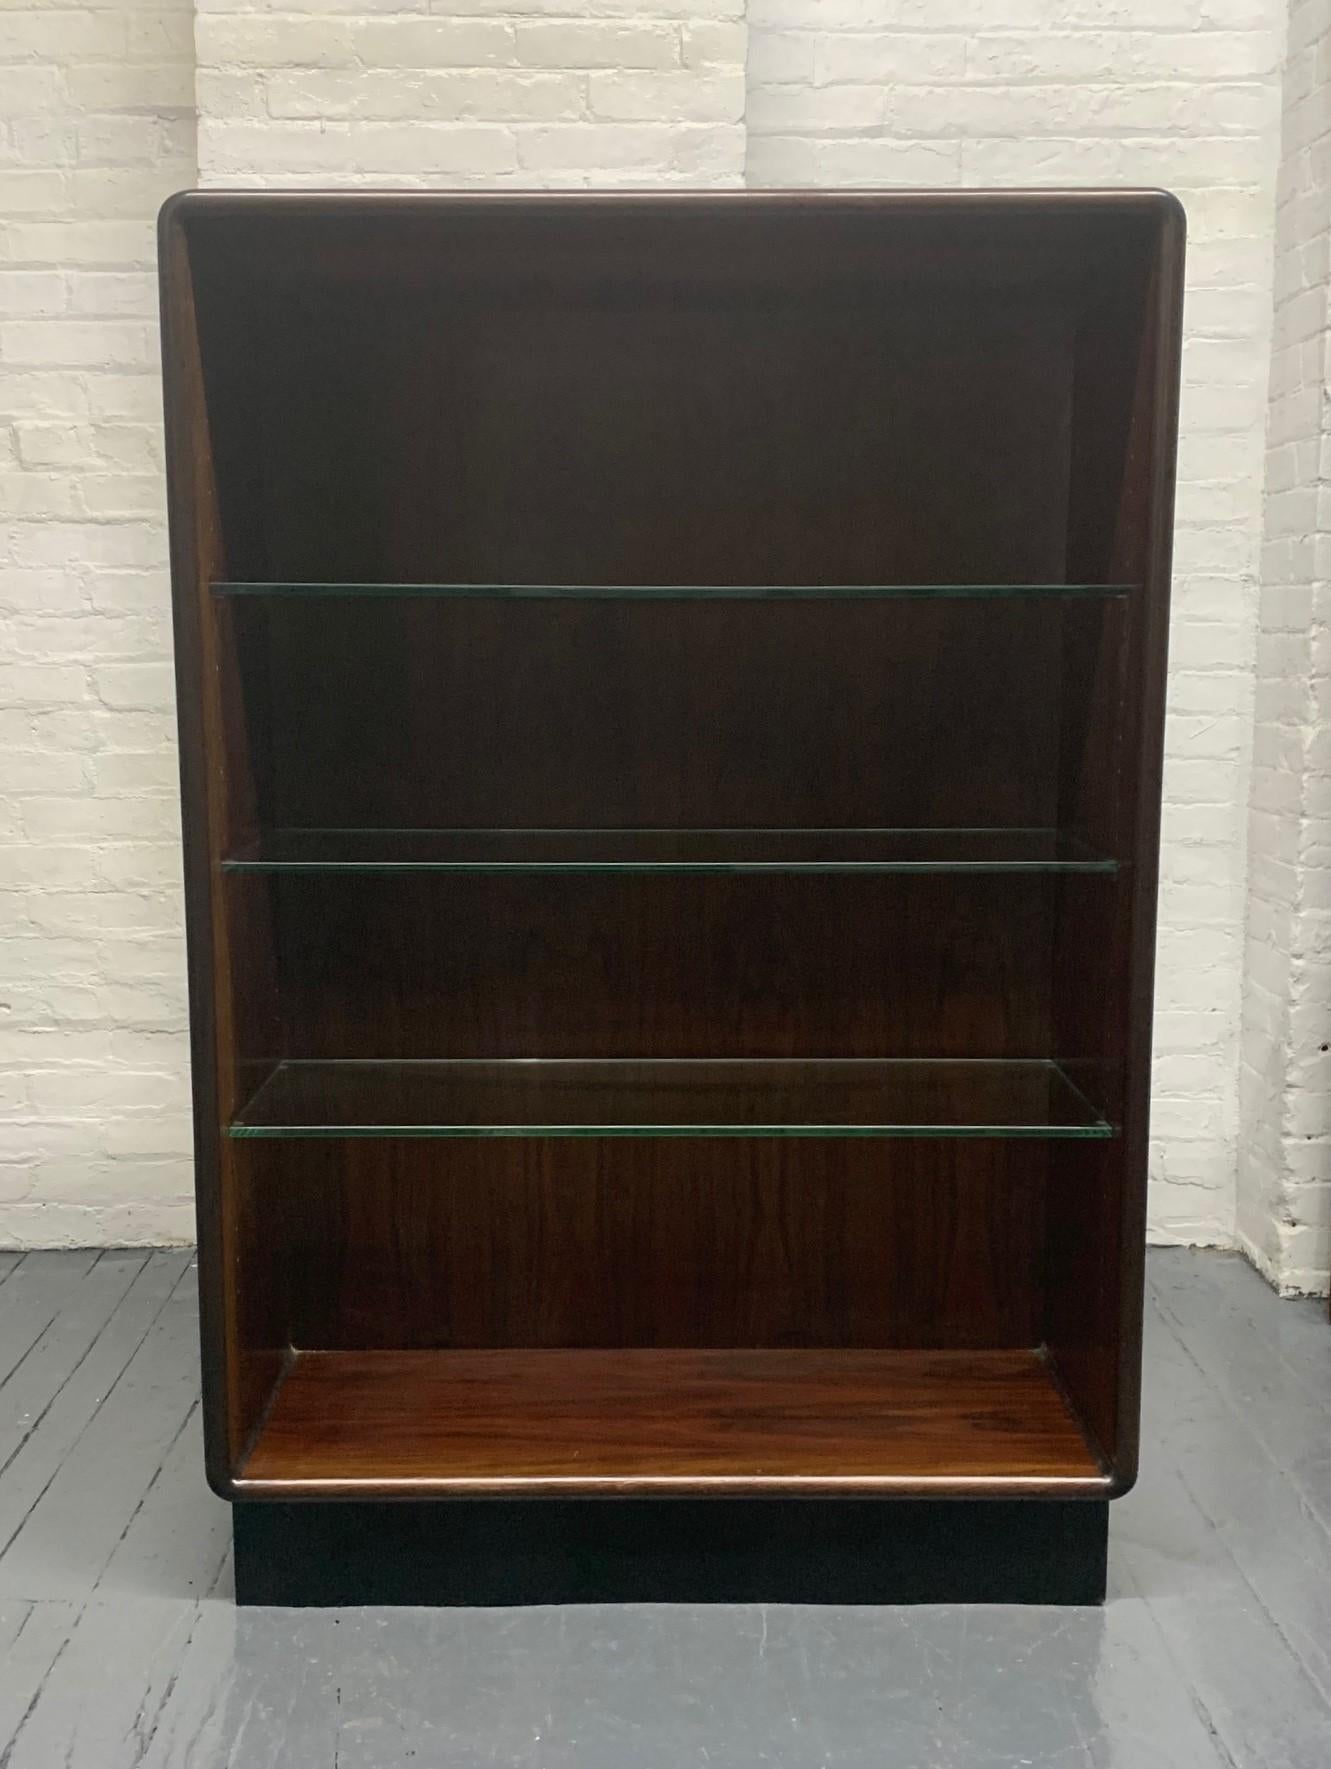 Two Danish modern rosewood bookcases. Bookcases have glass adjustable shelves with black lacquered bases. Beautiful rosewood grain.